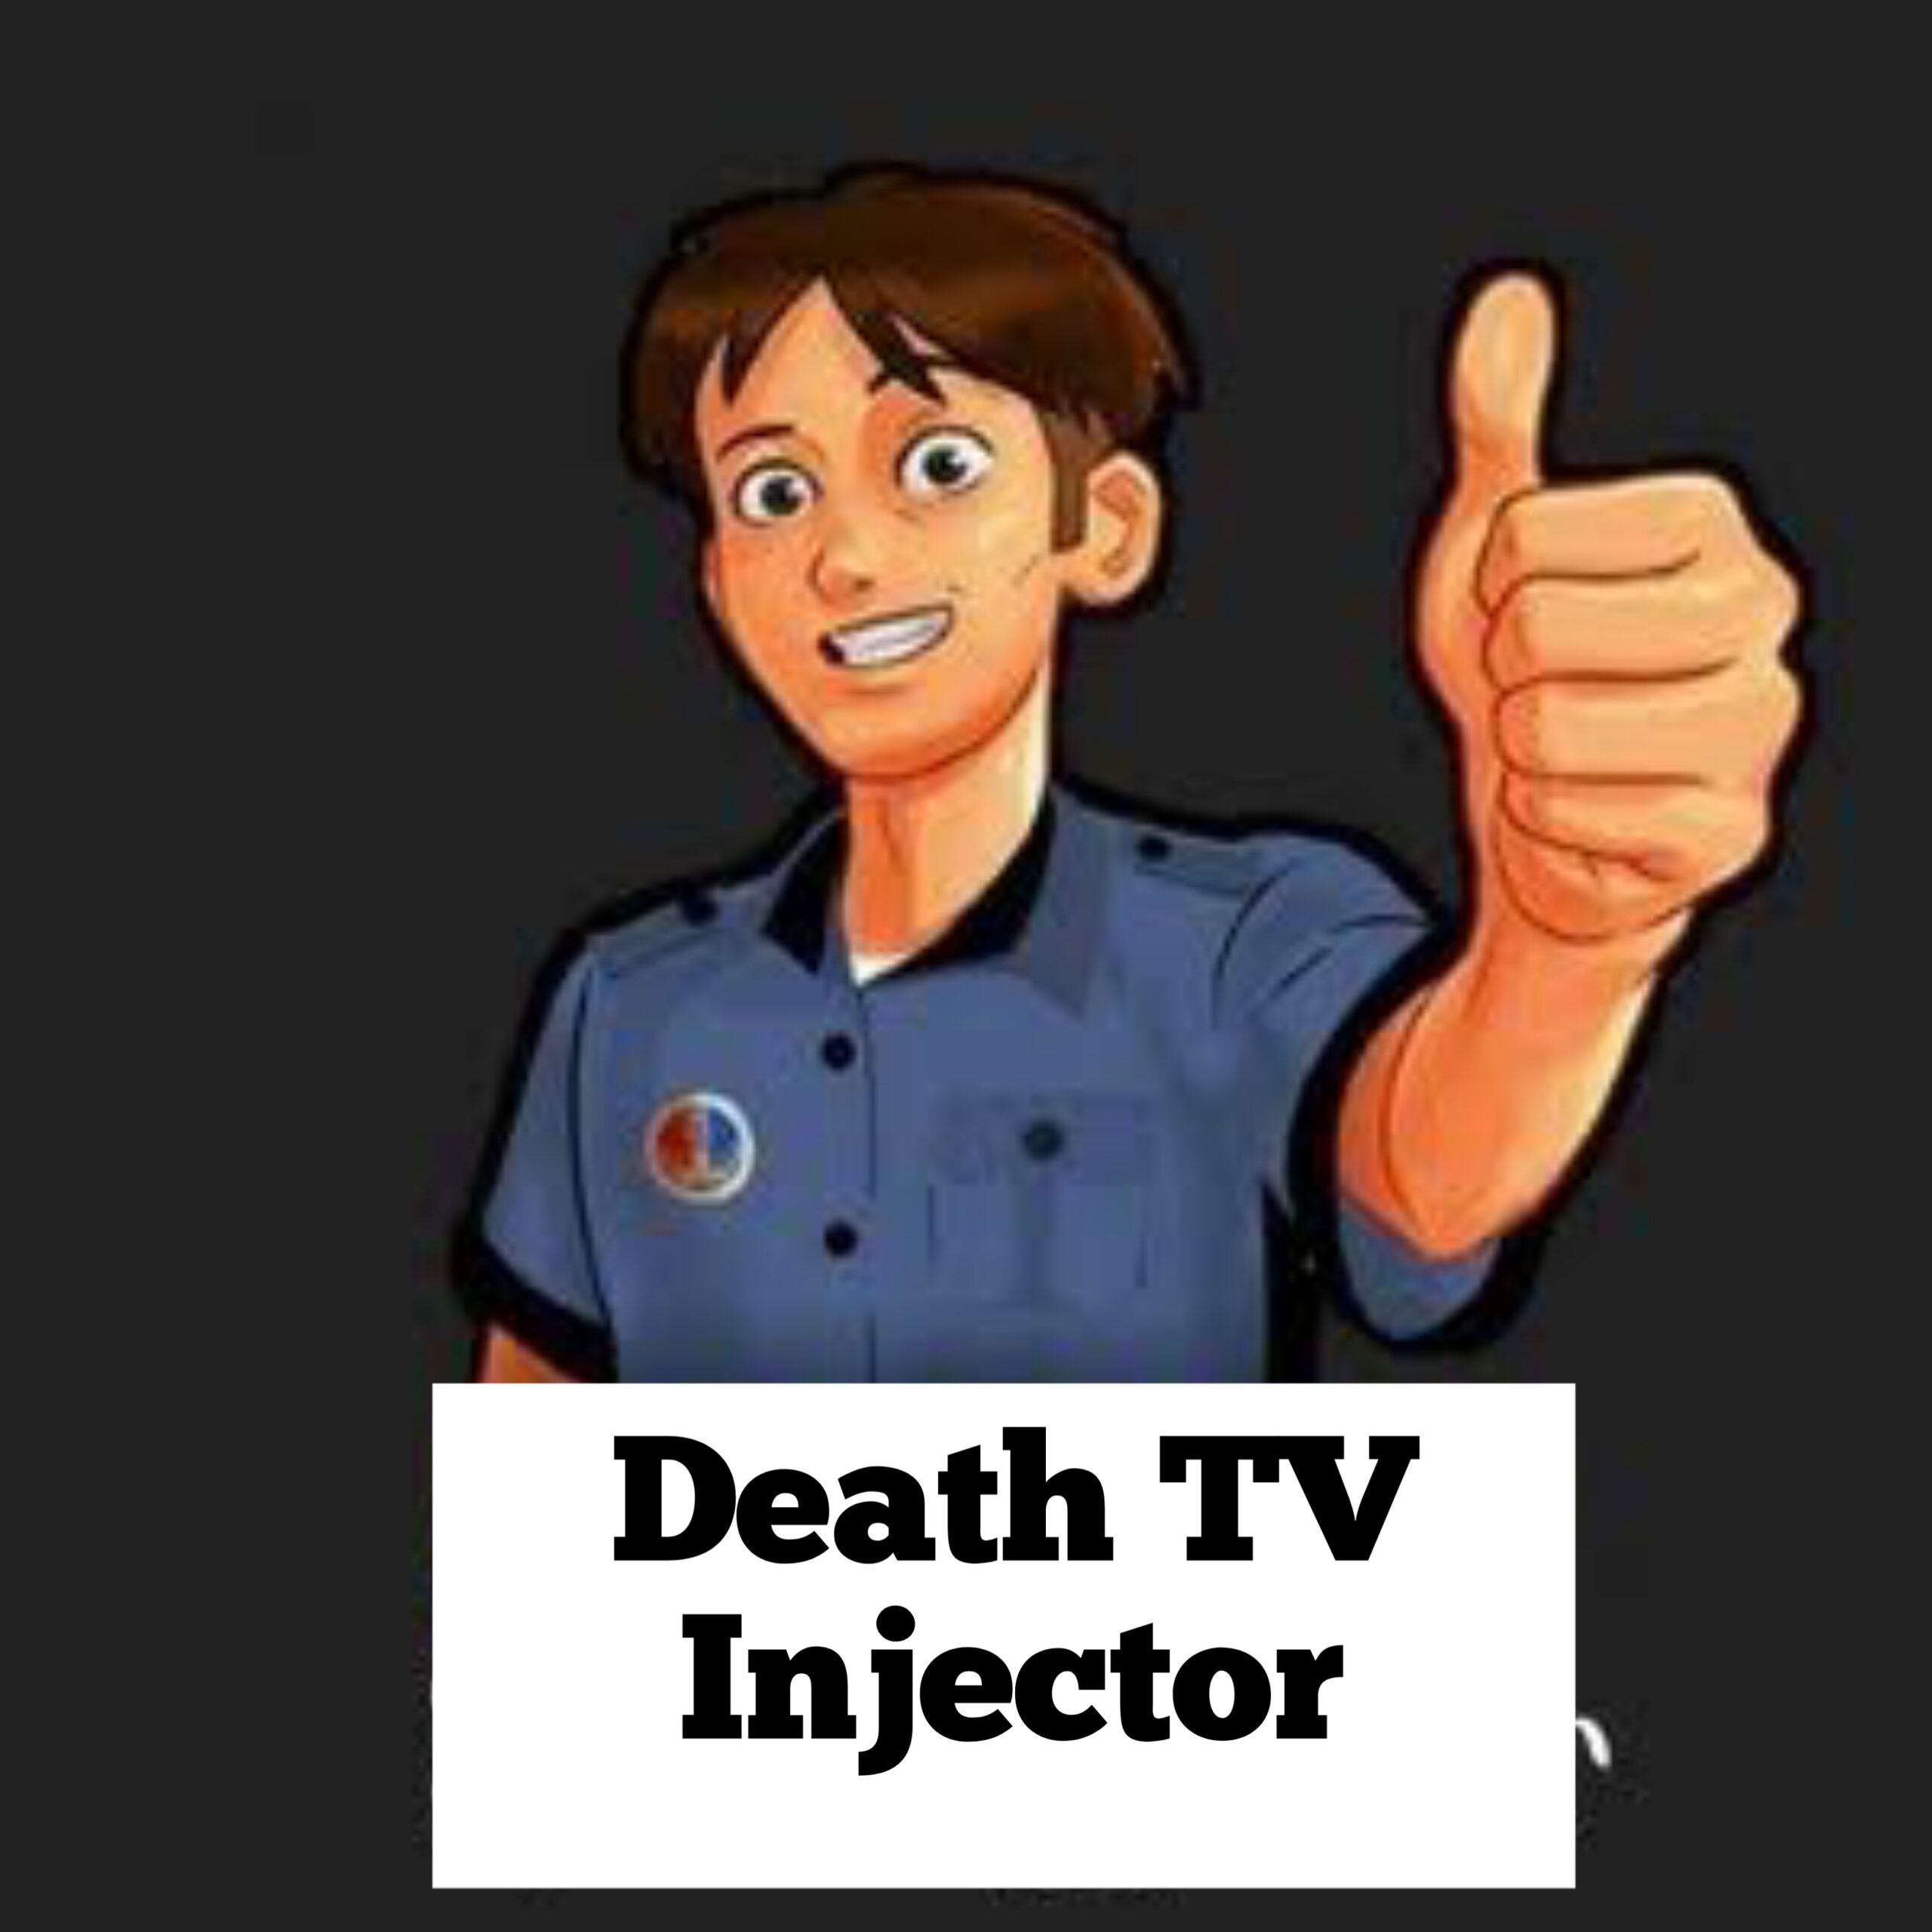 death TV injector